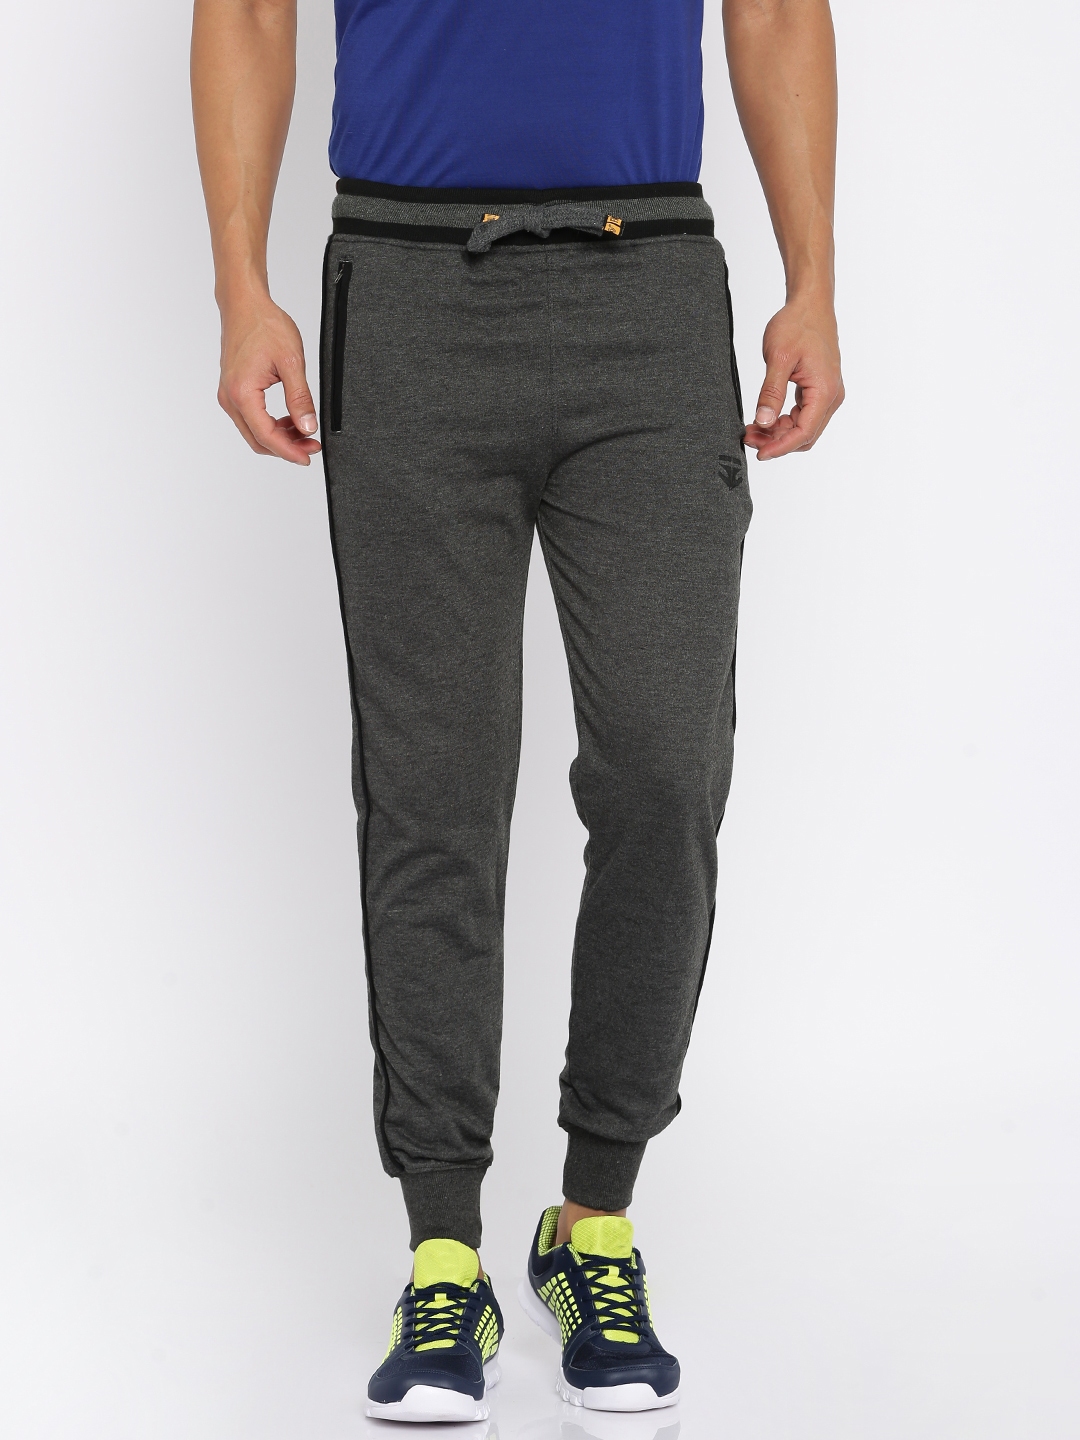 Buy FIFTY TWO Charcoal Grey Joggers - Track Pants for Men 1676479 | Myntra